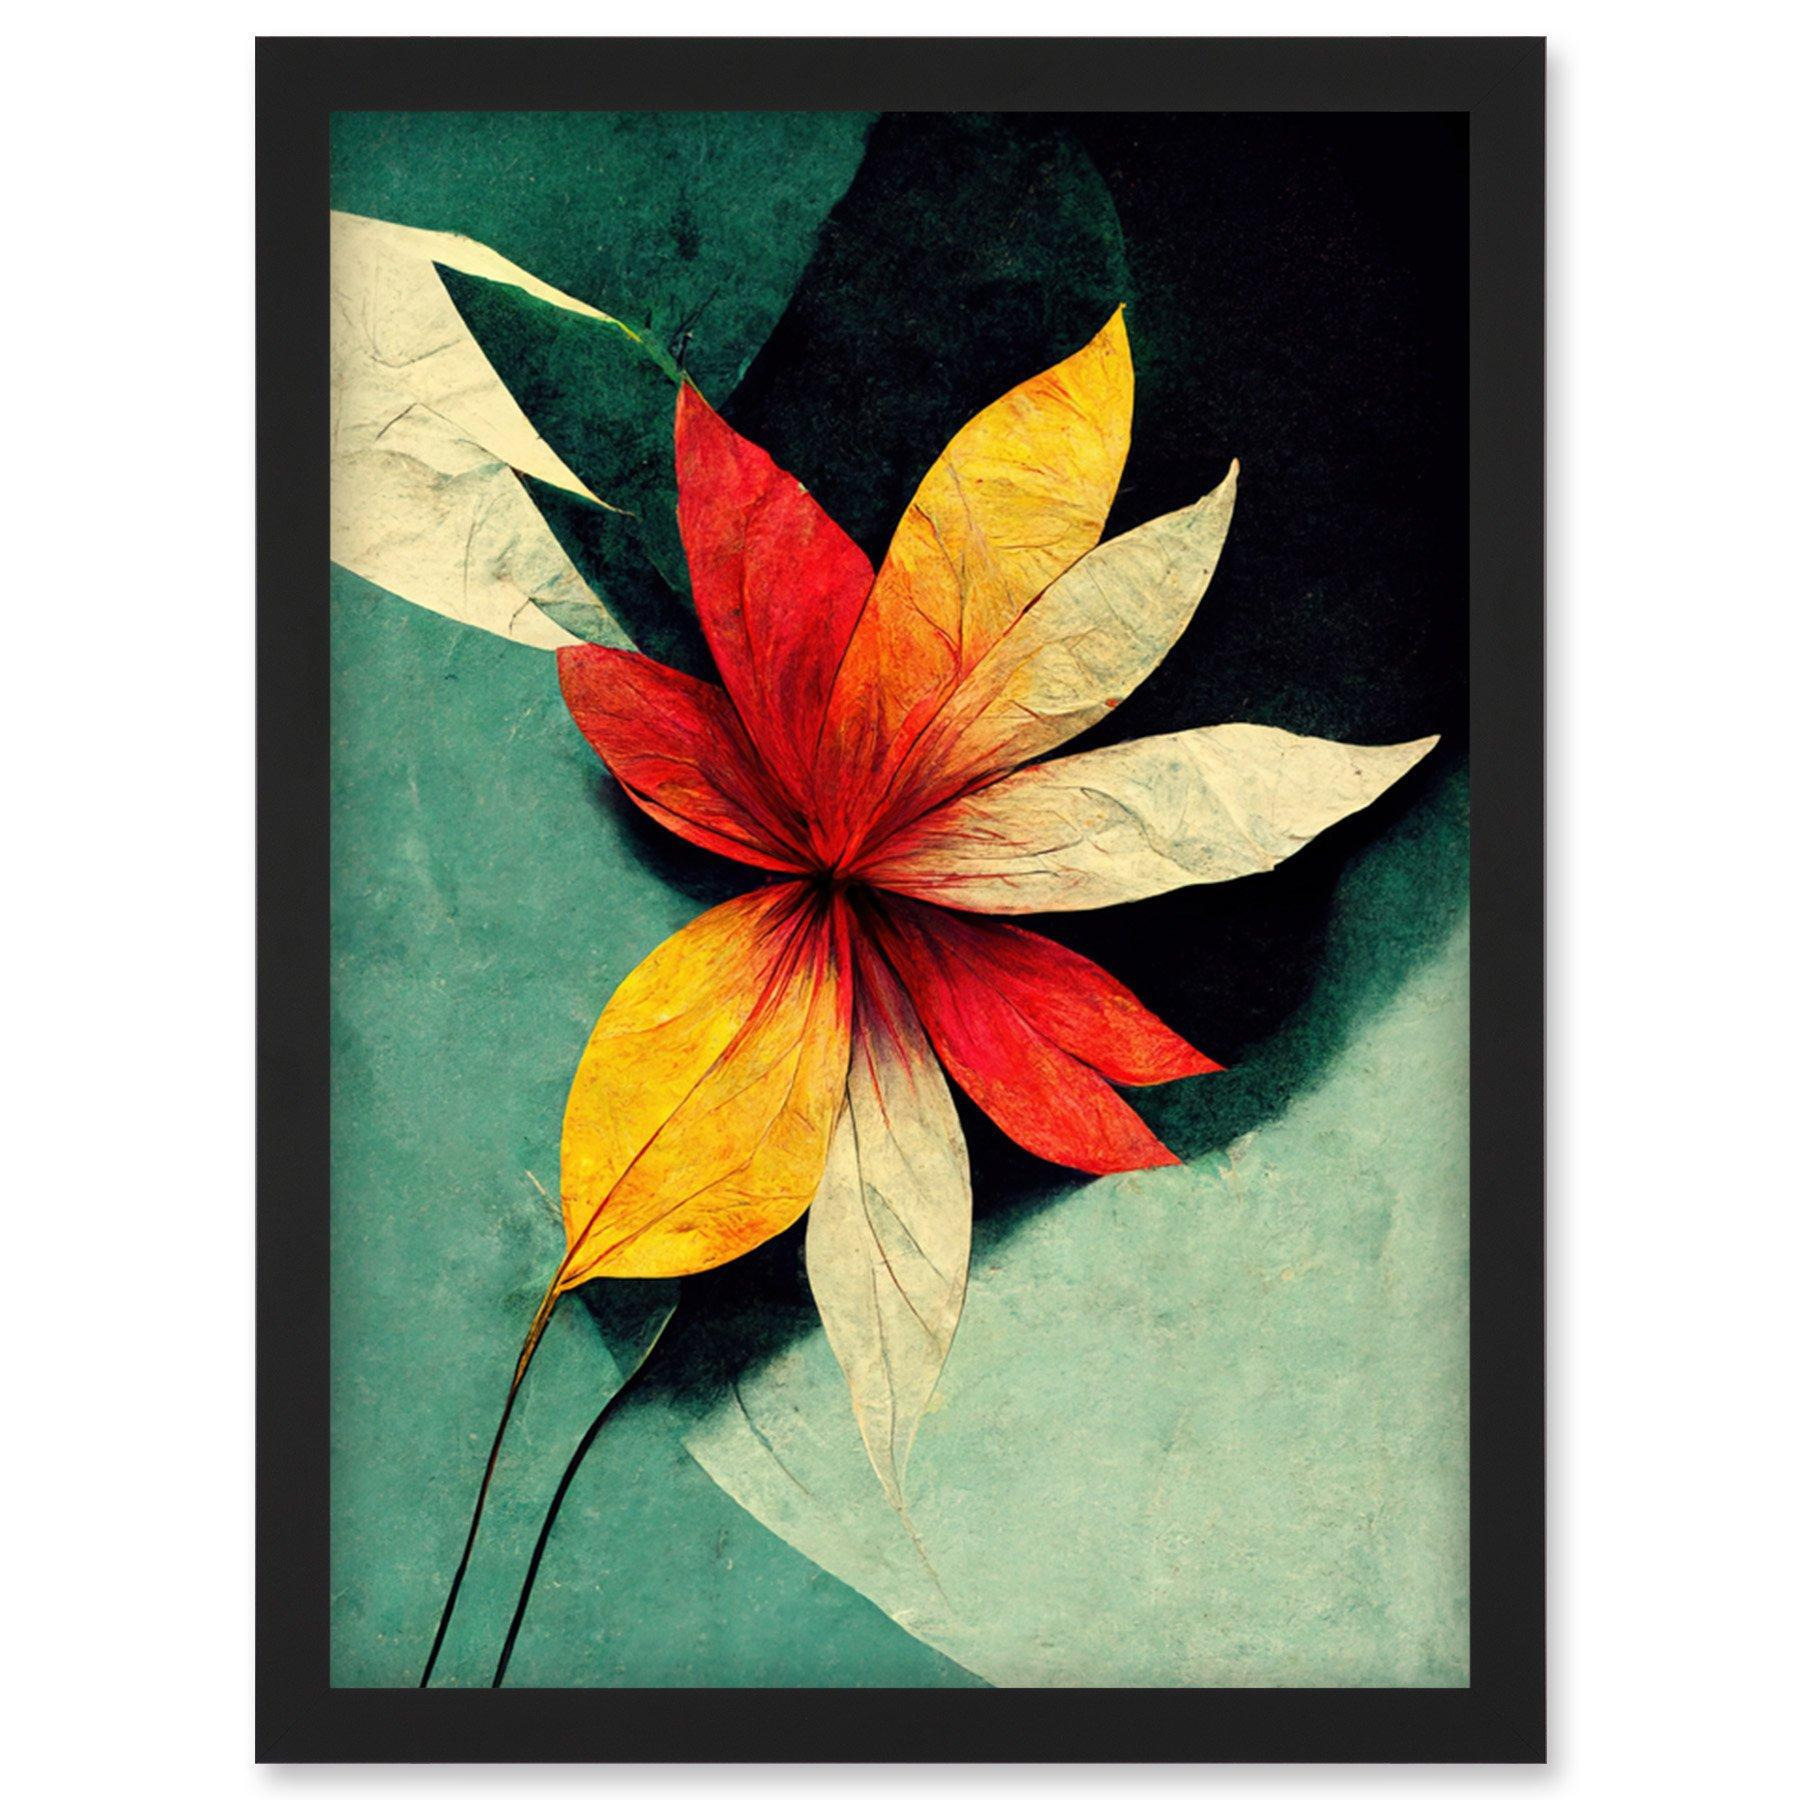 Abstract Flowers Teal Red Yellow Artwork Framed Wall Art Print A4 - image 1